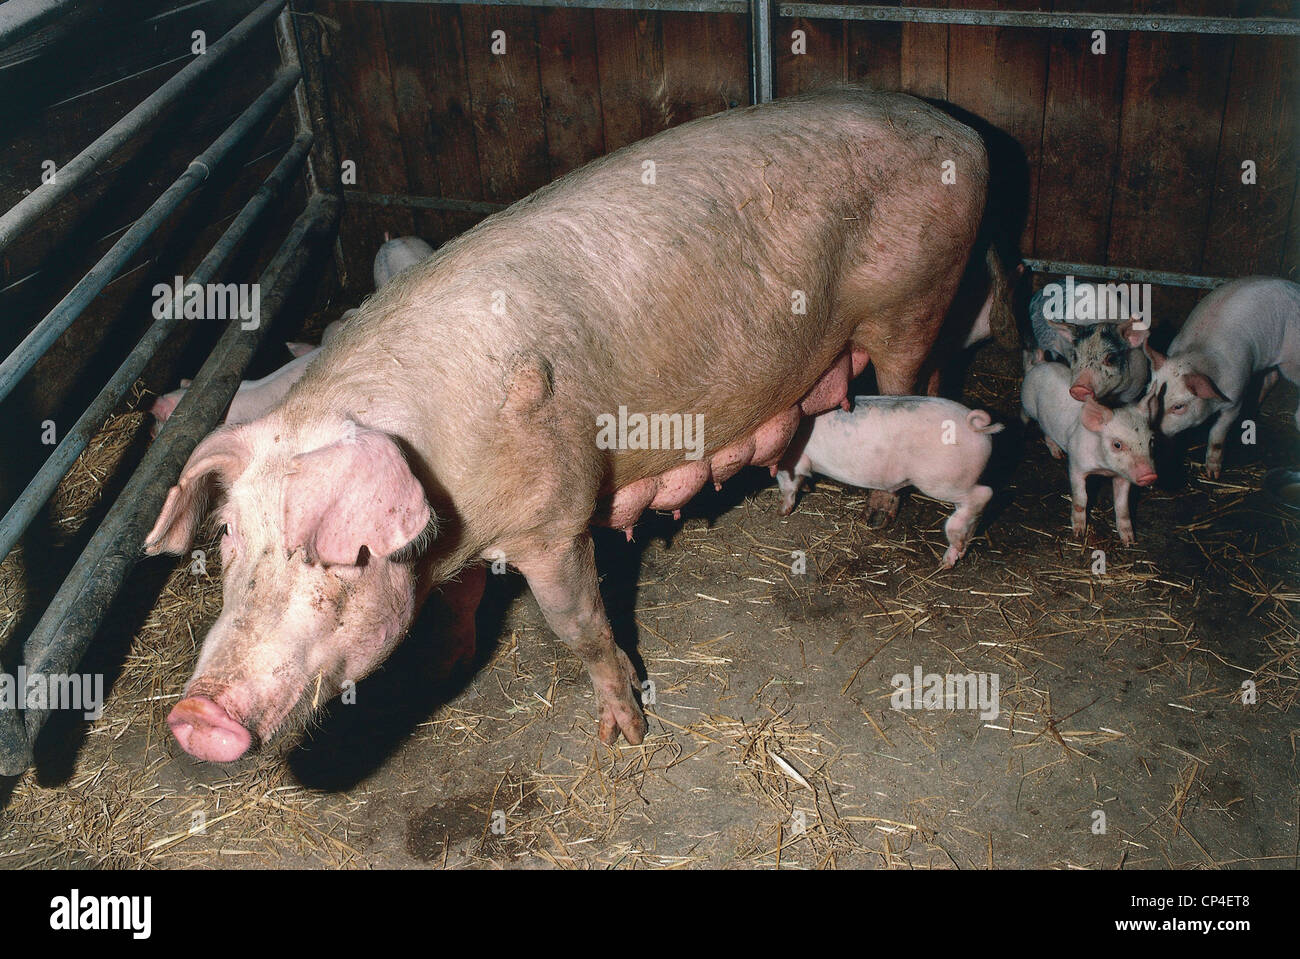 Zoology - Ungulates - suina - Pig (Sus scrofa and Sus domesticus). Sow with litter. Sweden, Uppland. Stock Photo